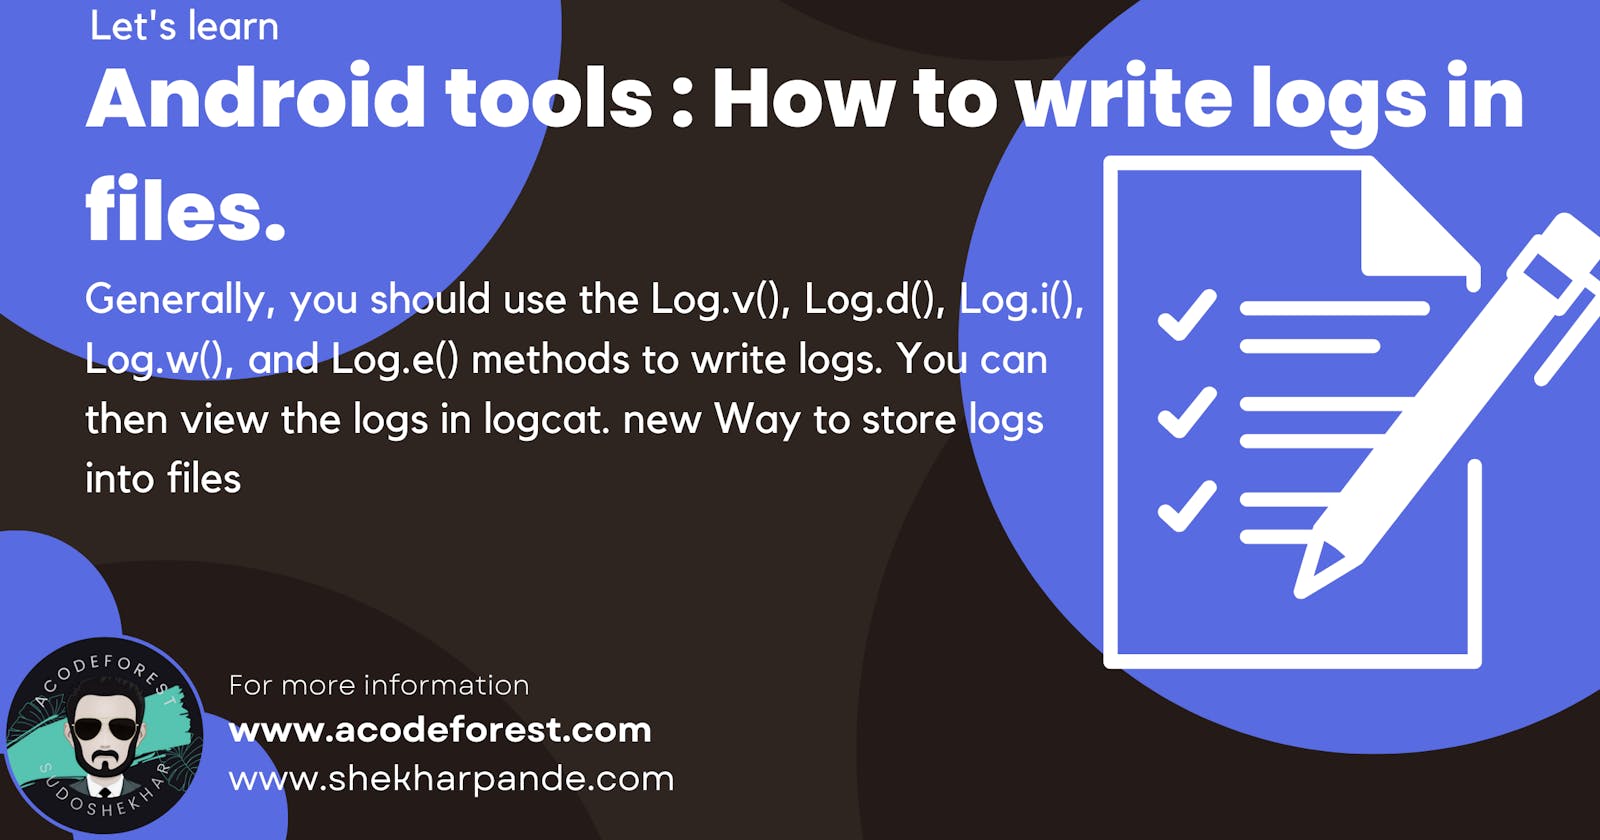 Android tools : How to write logs in files.